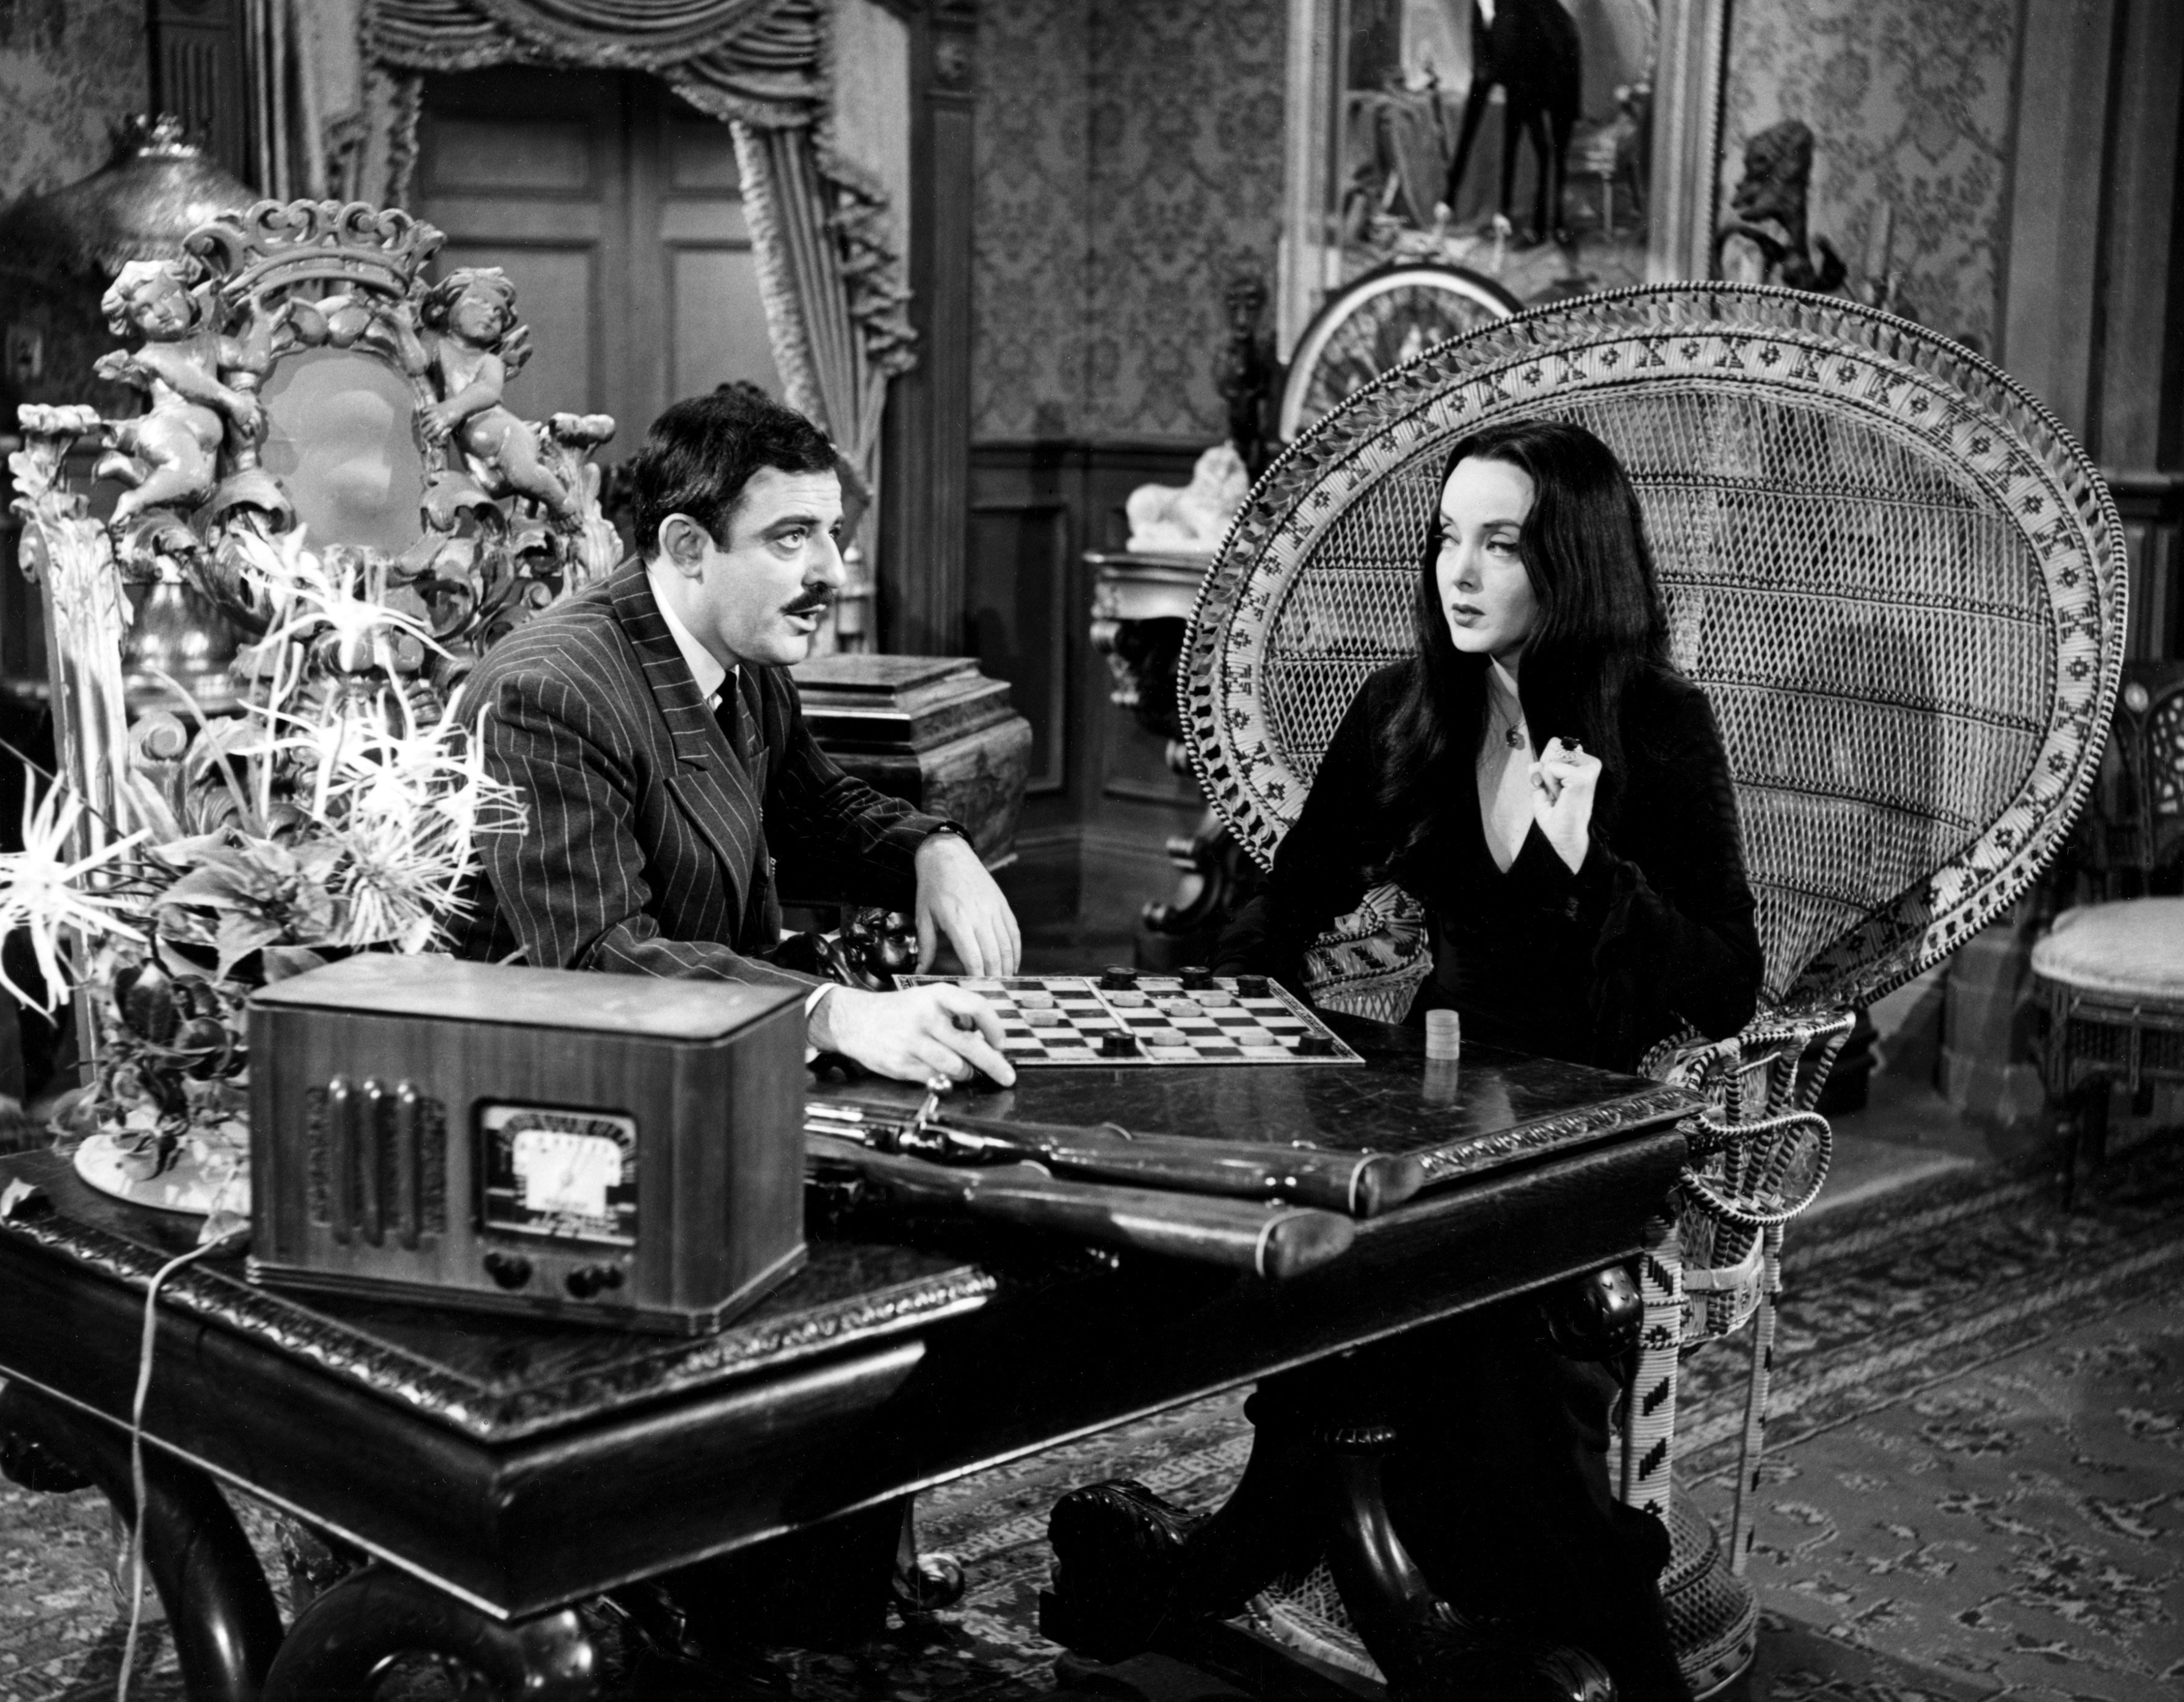 John Astin in a suit and Carolyn Jones in a black dress in a scene from 'The Addams Family.'